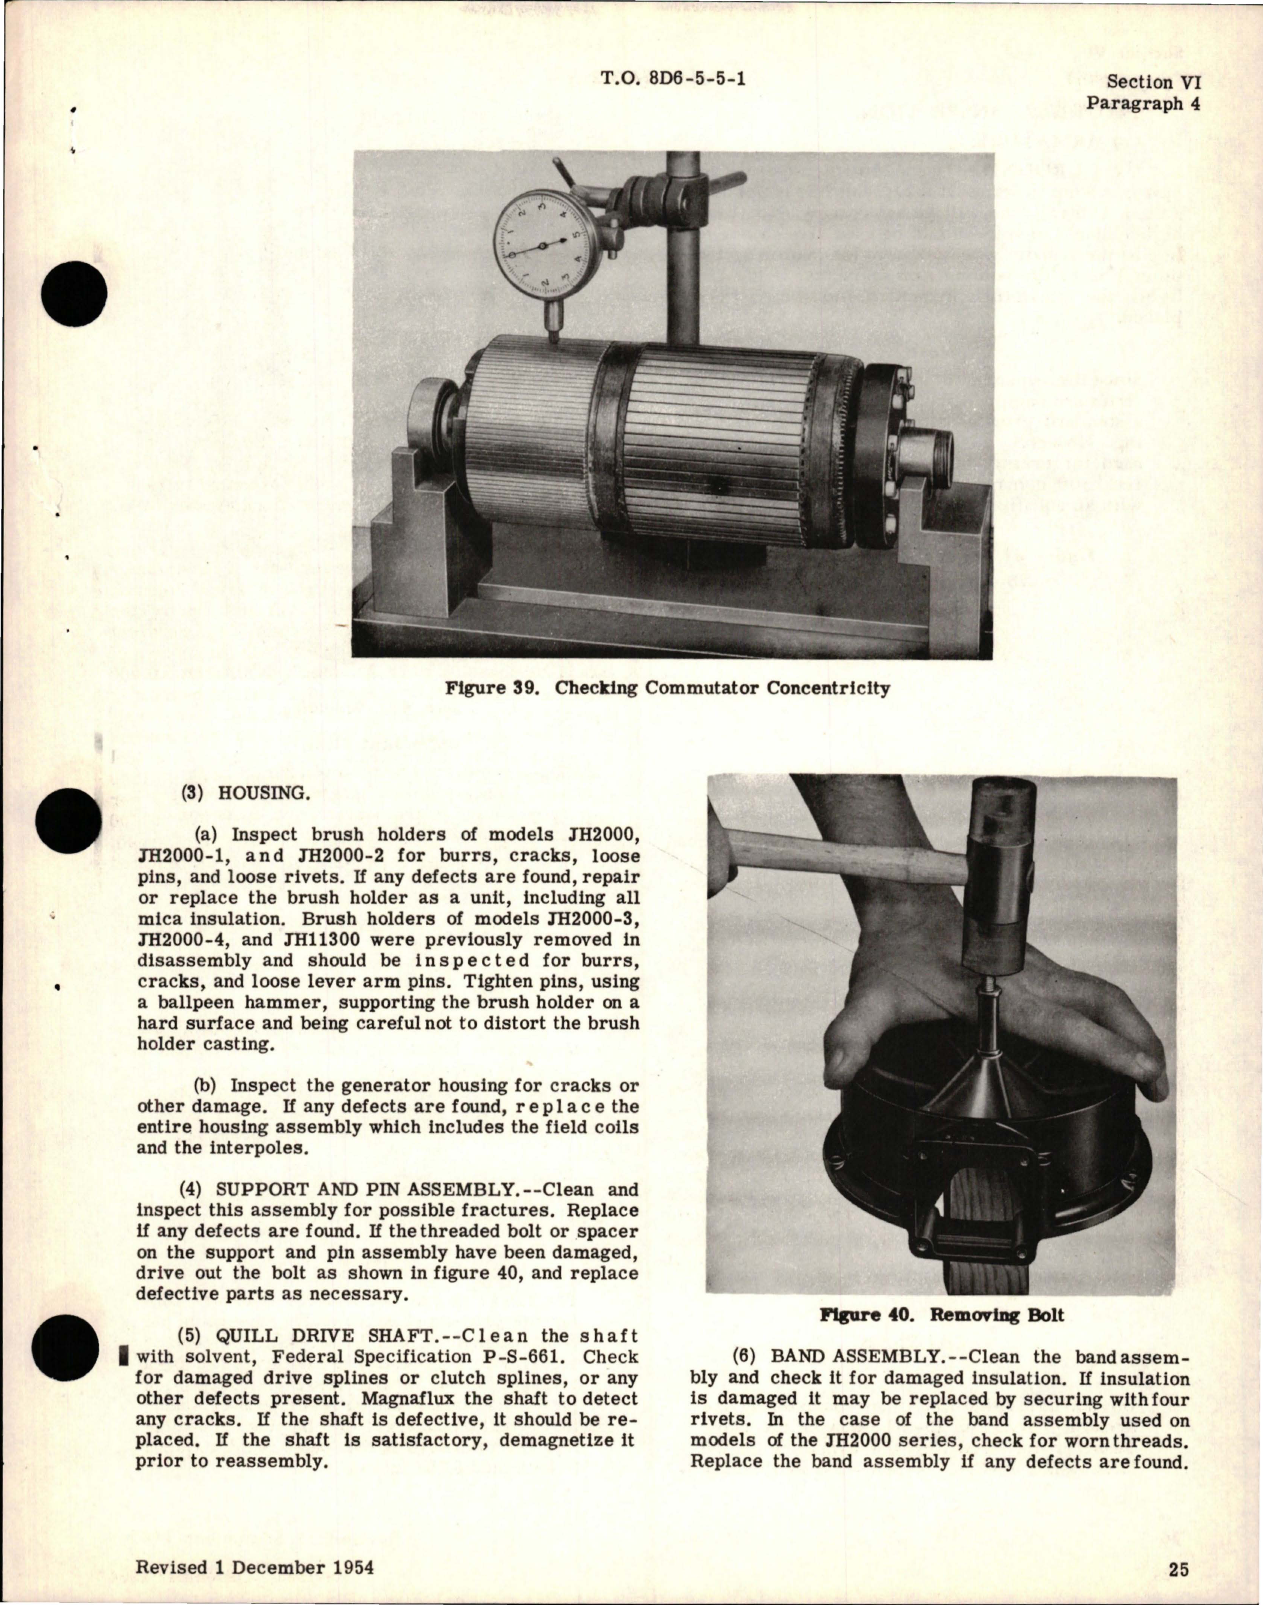 Sample page 5 from AirCorps Library document: Operation, Service and Overhaul Instructions with Parts Catalog for Generators - Types R-1 and R-2